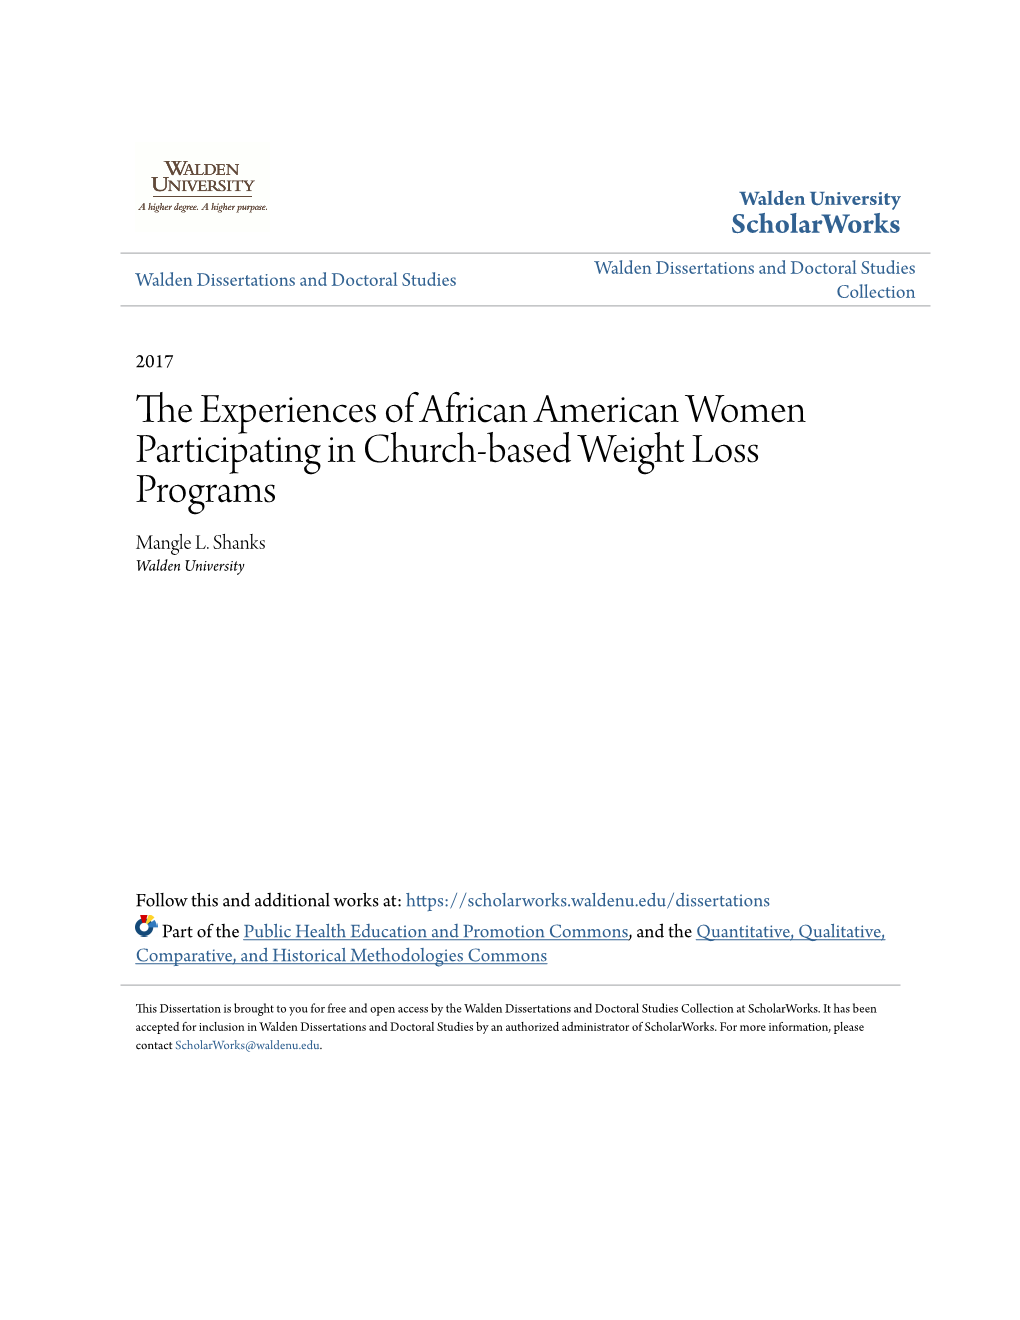 The Experiences of African American Women Participating in Church-Based Weight Loss Programs Mangle L